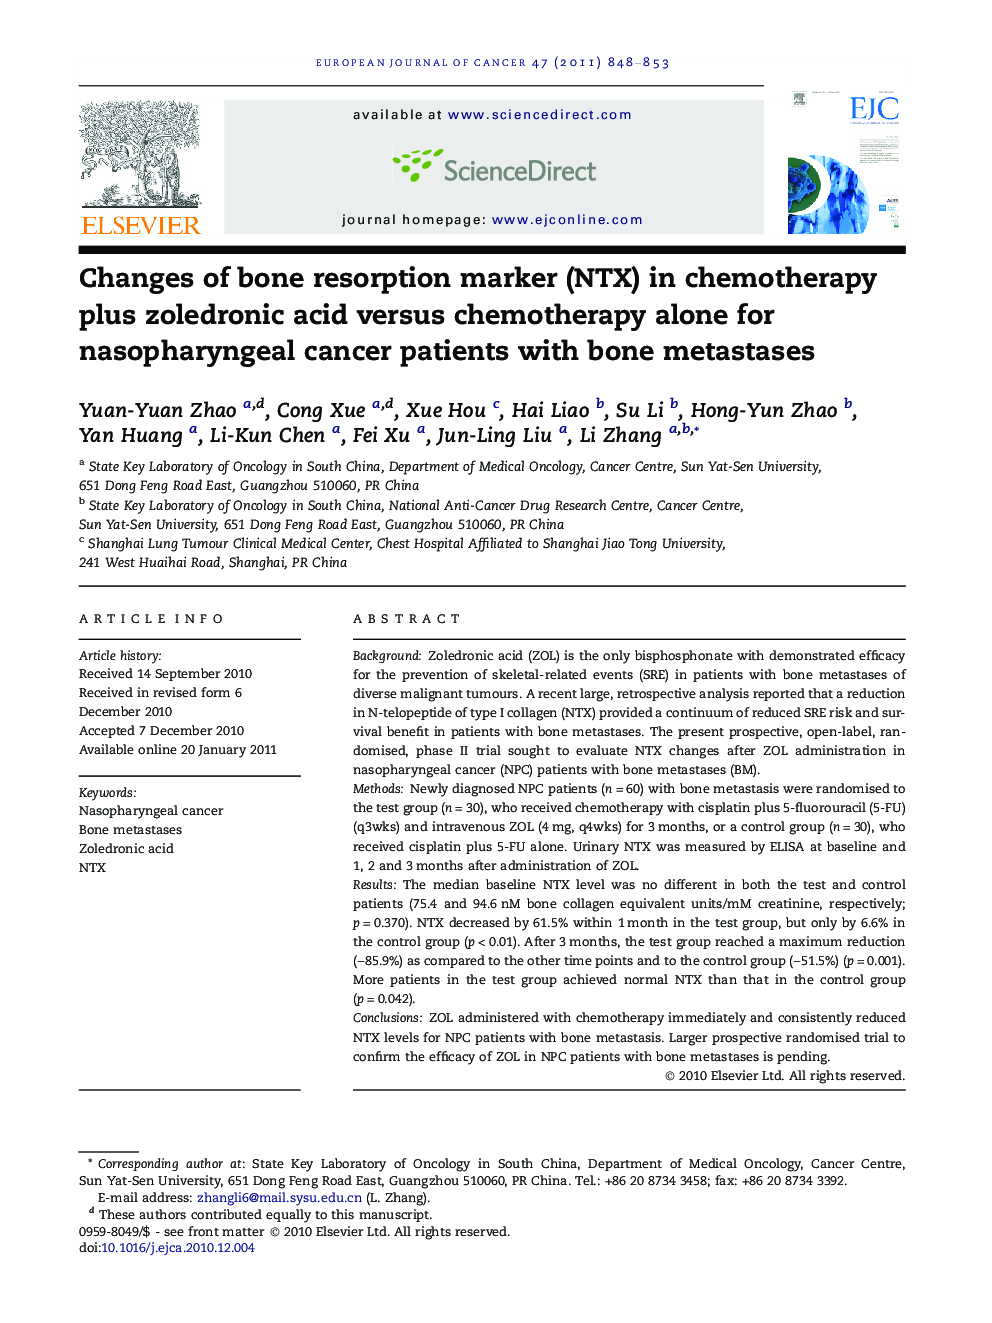 Changes of bone resorption marker (NTX) in chemotherapy plus zoledronic acid versus chemotherapy alone for nasopharyngeal cancer patients with bone metastases